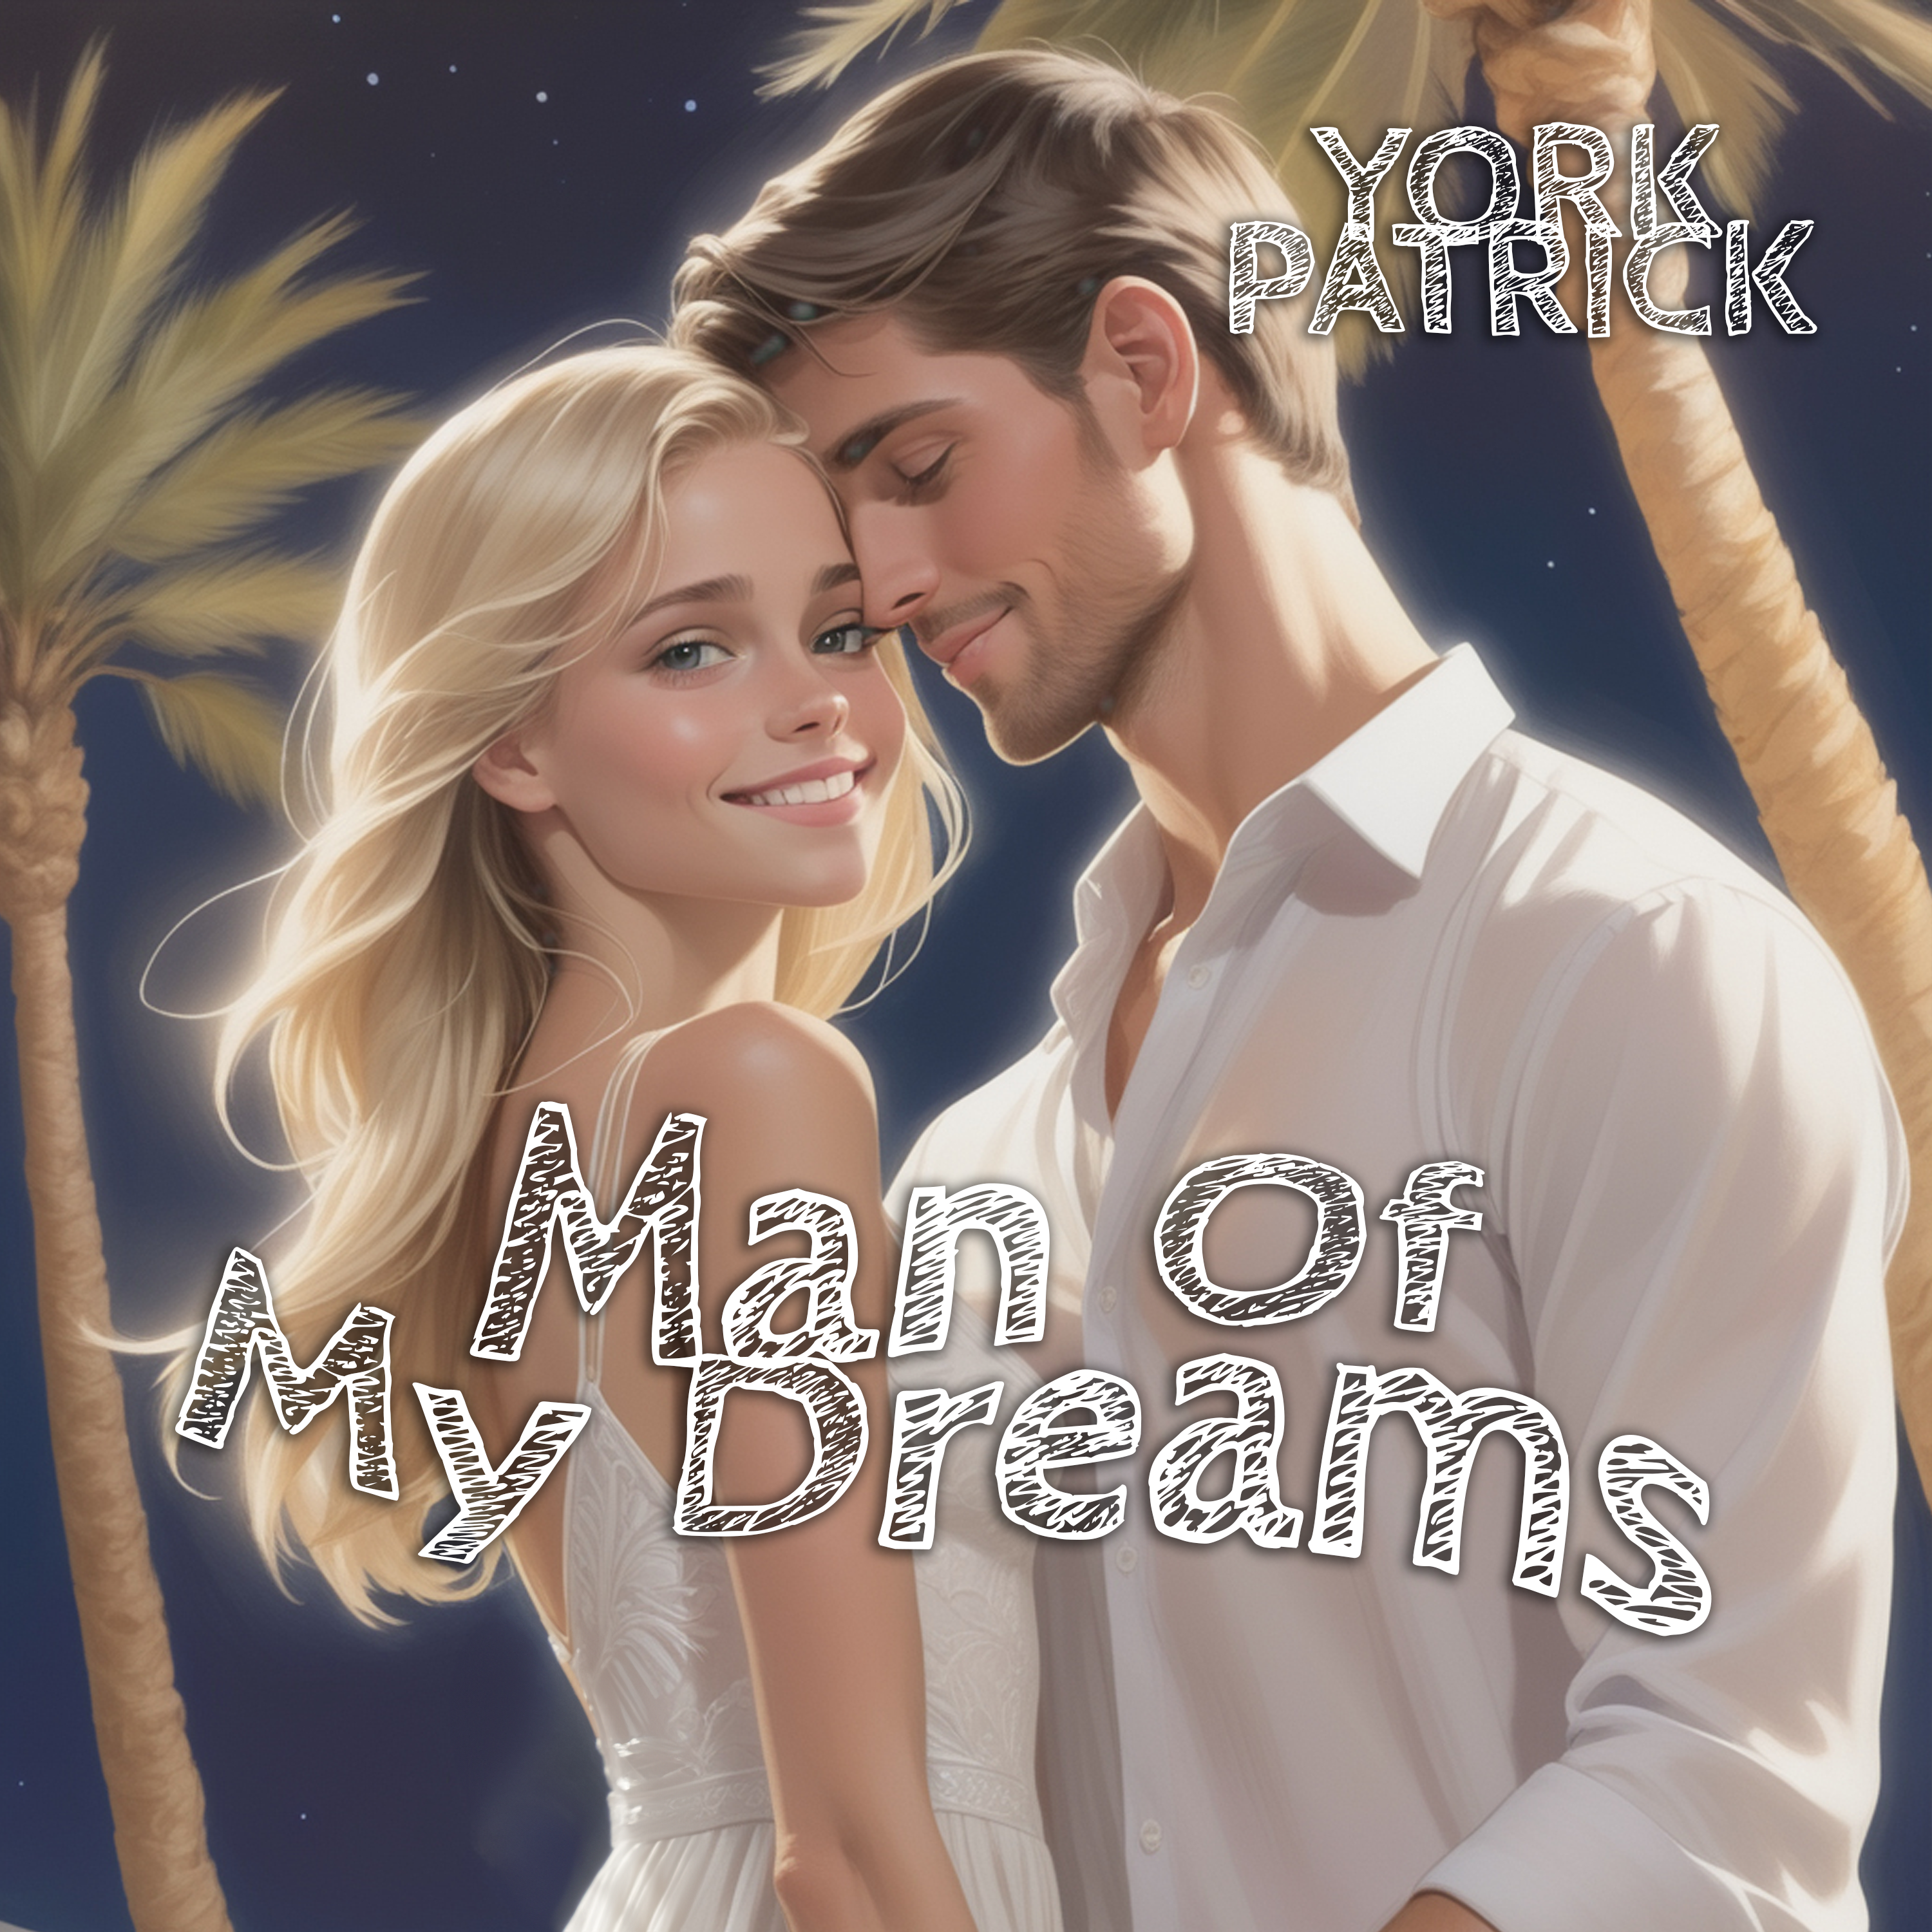 Man of My Dreams Cover